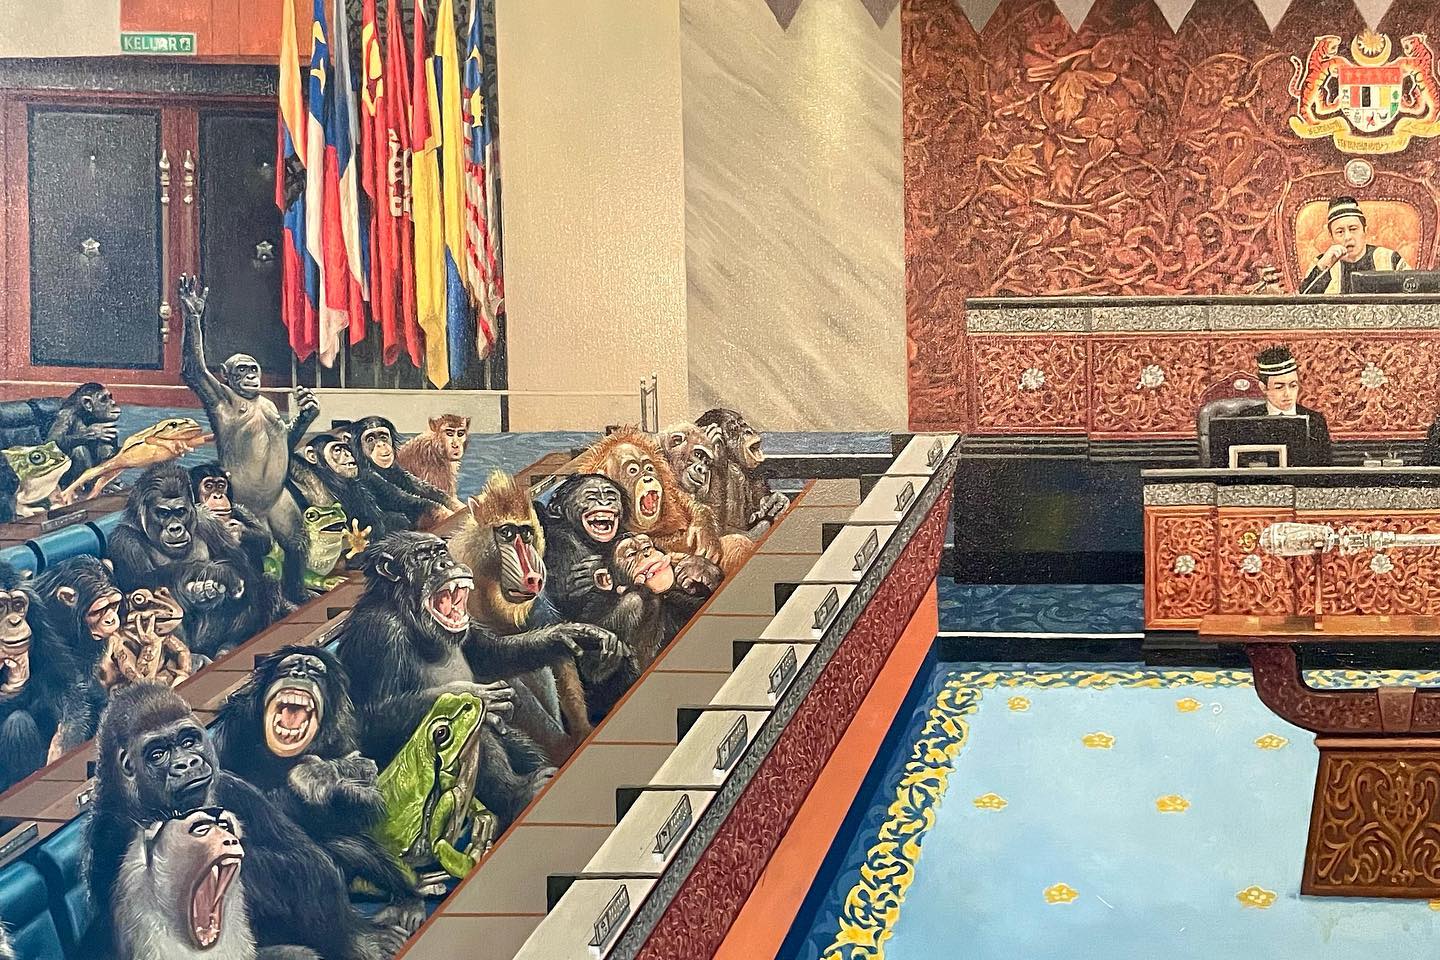 The Sultan of Selangor has acquired a painting depicting the Parliament filled with monkeys, chimpanzees, baboons and frogs. Source: Selangor Royal Office